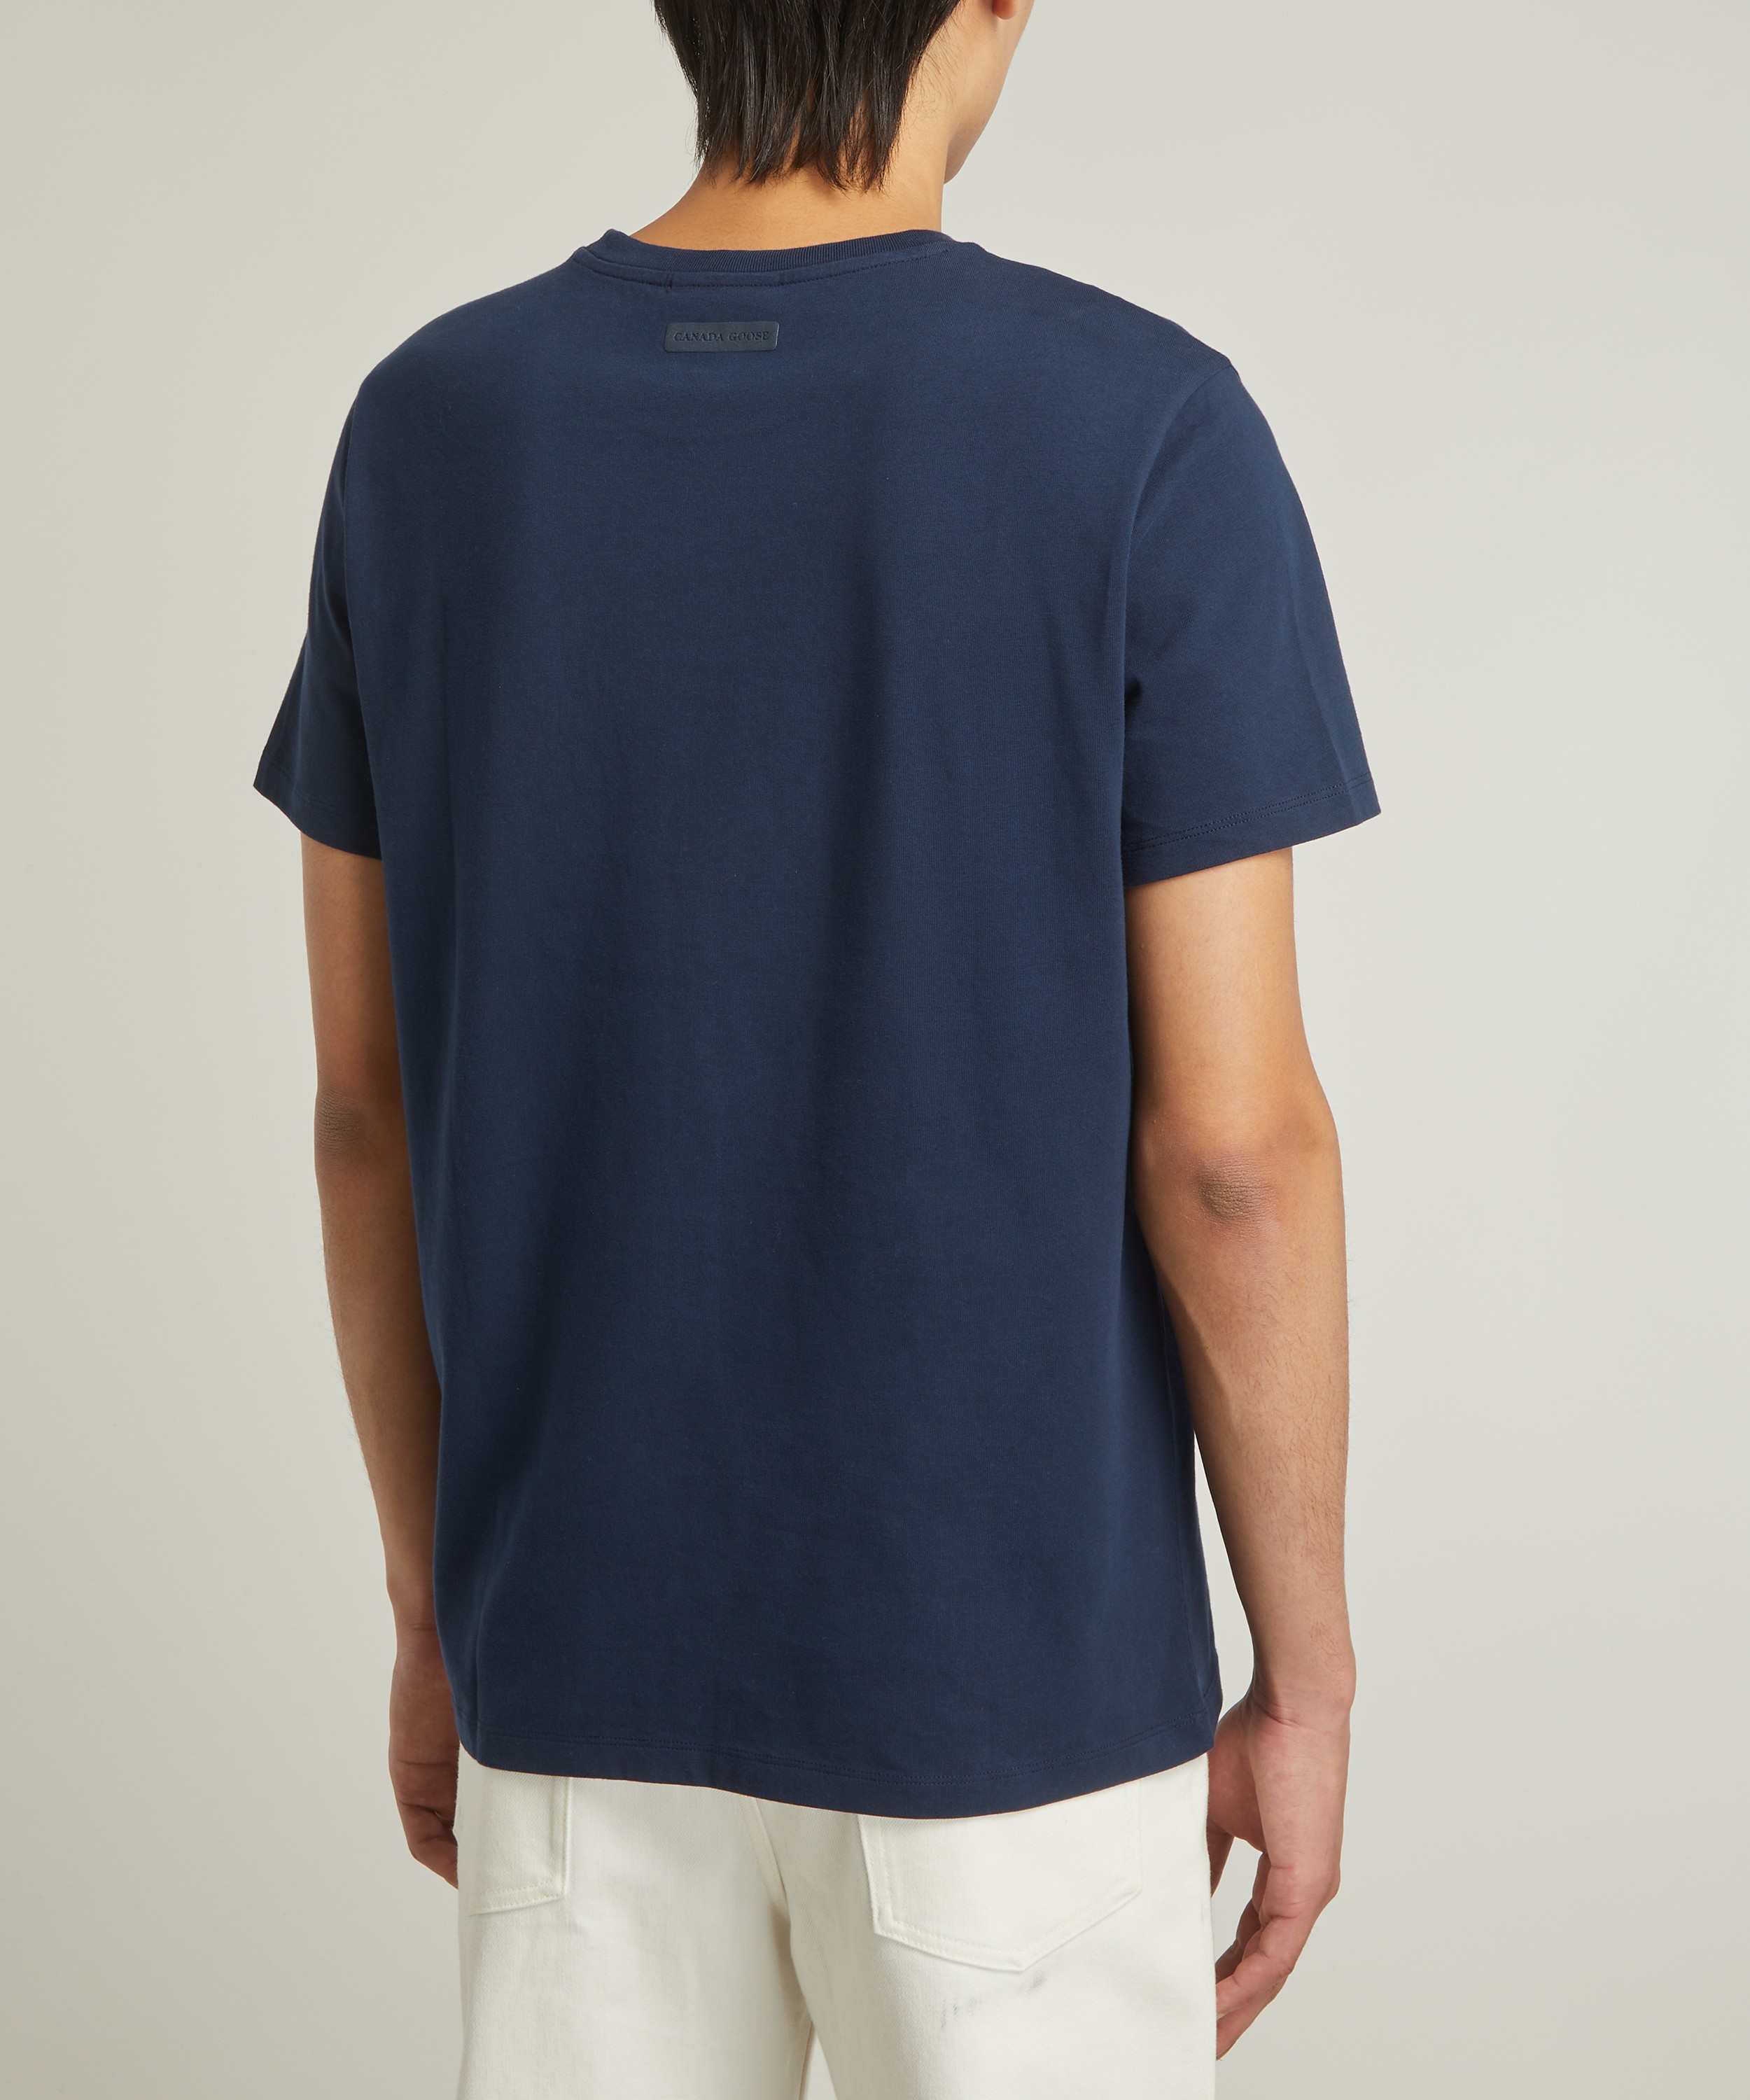 Canada Goose - Emerson Crew-Neck T-Shirt image number 3